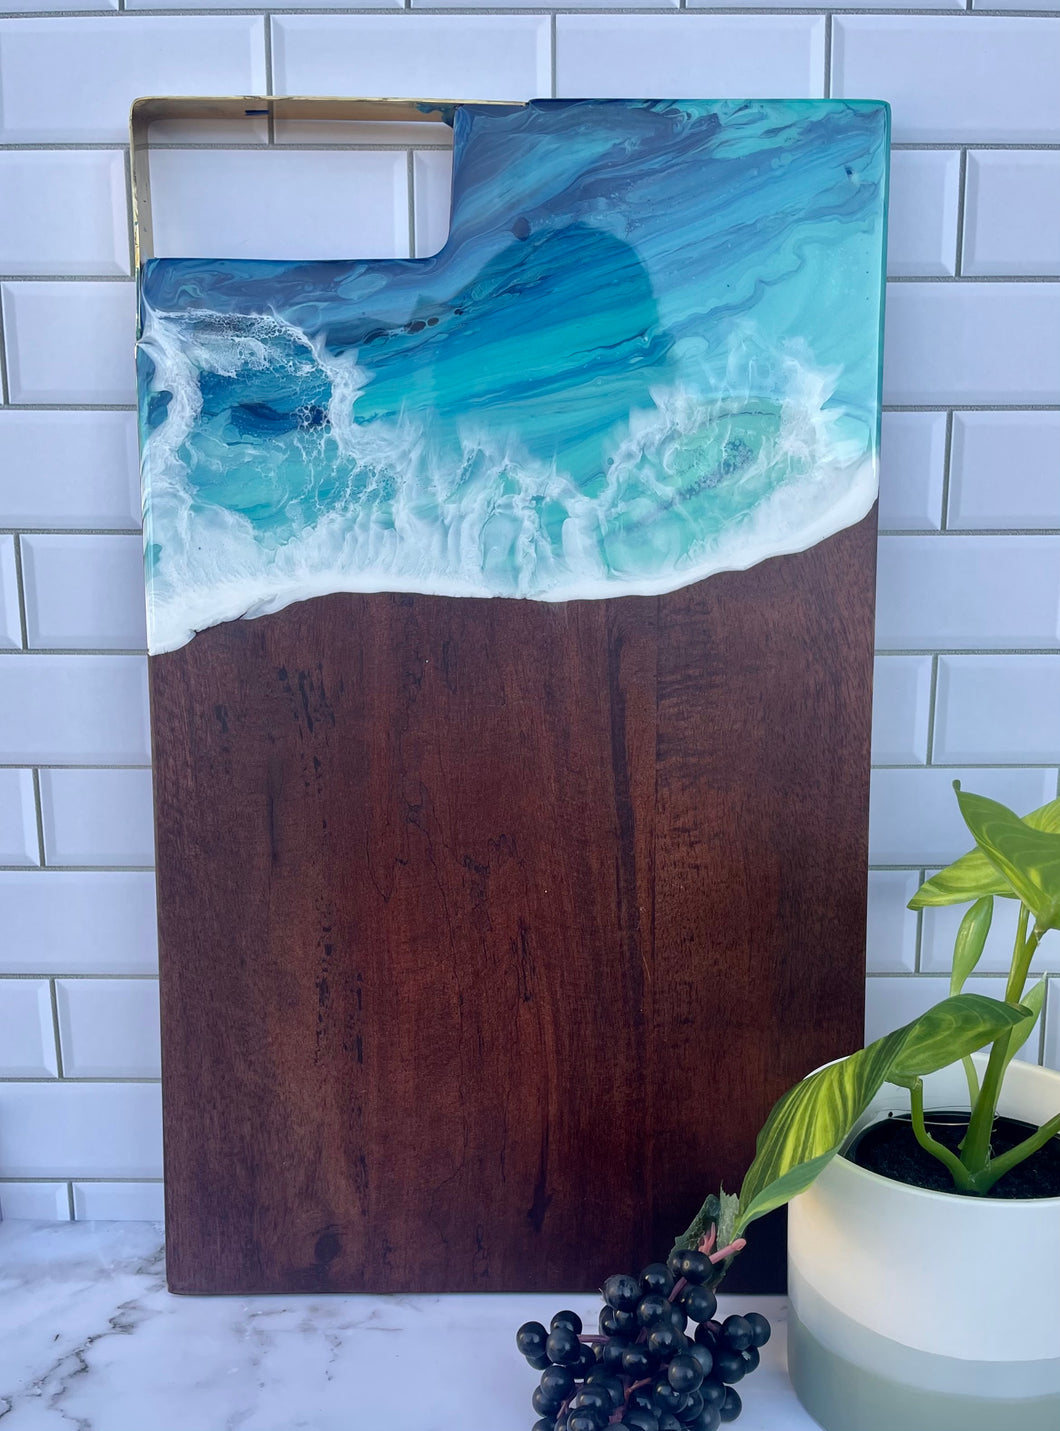 Cheeseboard with Brass Handle, Beach Resin Art Serving Tray